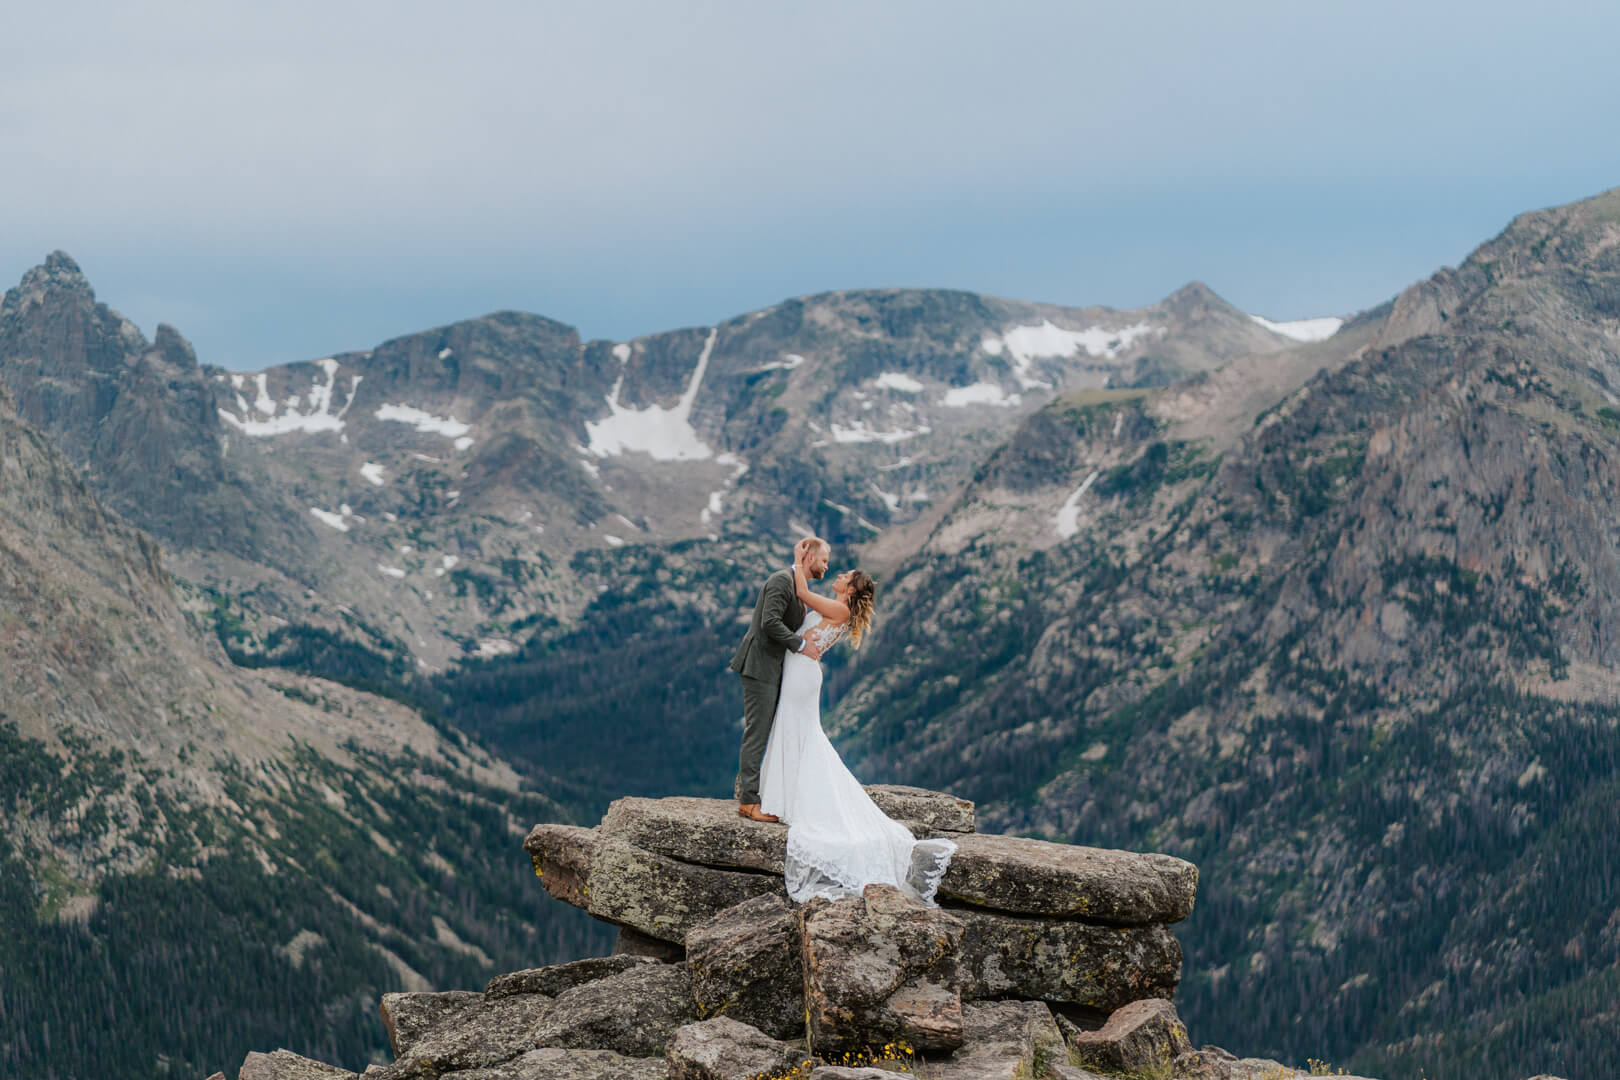 A couple posing for a photo during their elopement in Rocky Mountain National Park.